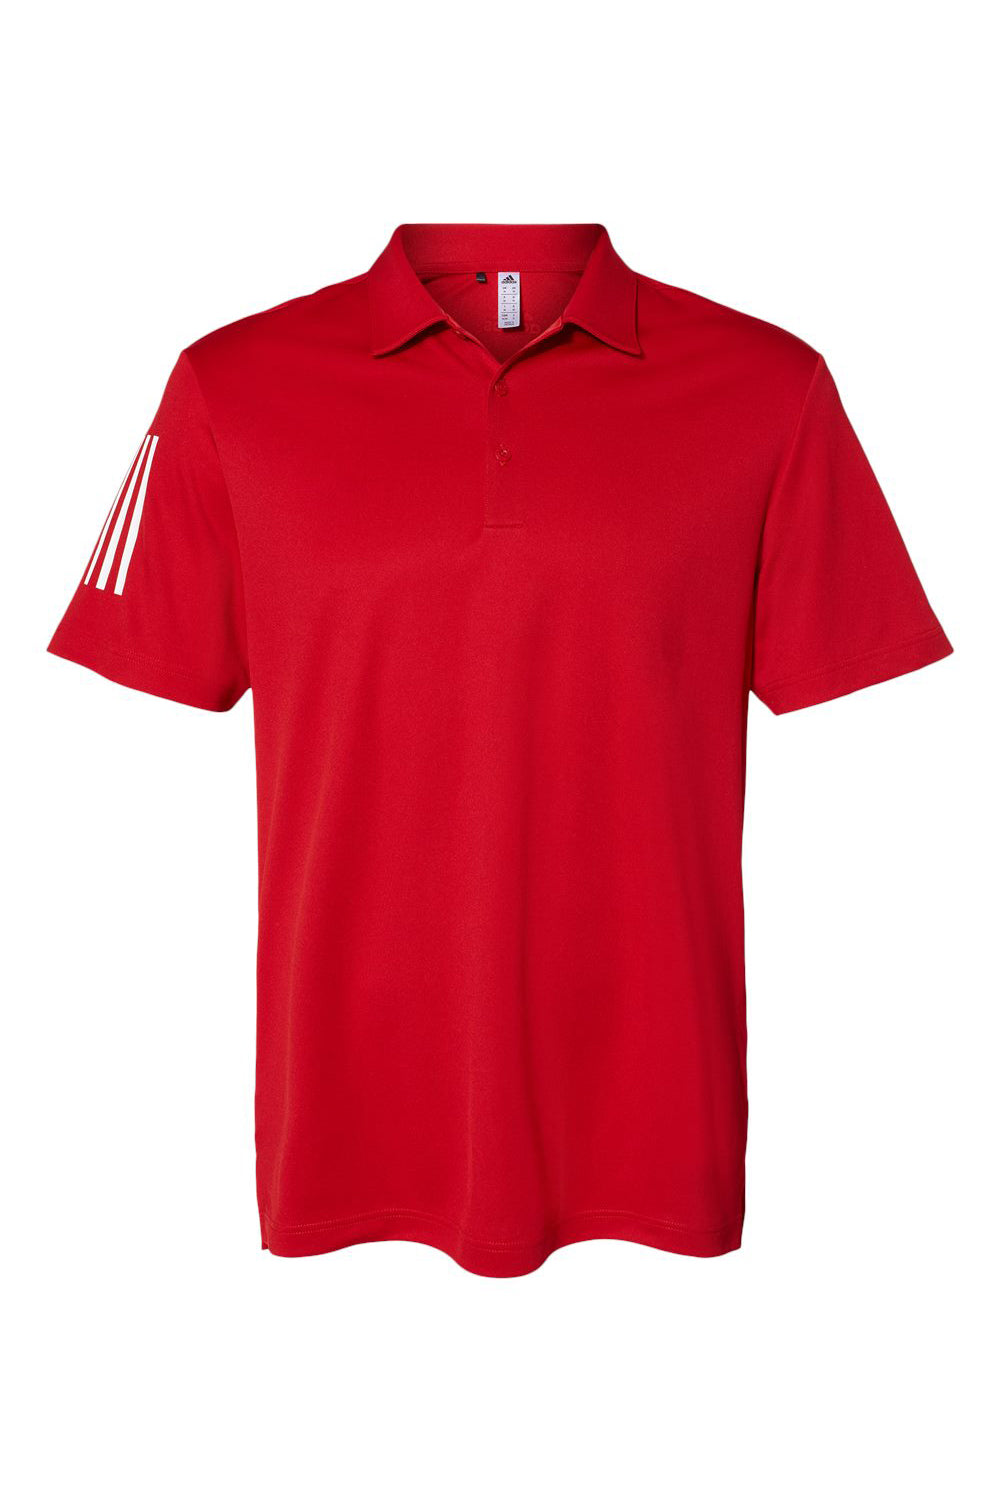 Adidas A480 Mens Floating 3 Stripes Polo Shirt Team Power Red/White Flat Front